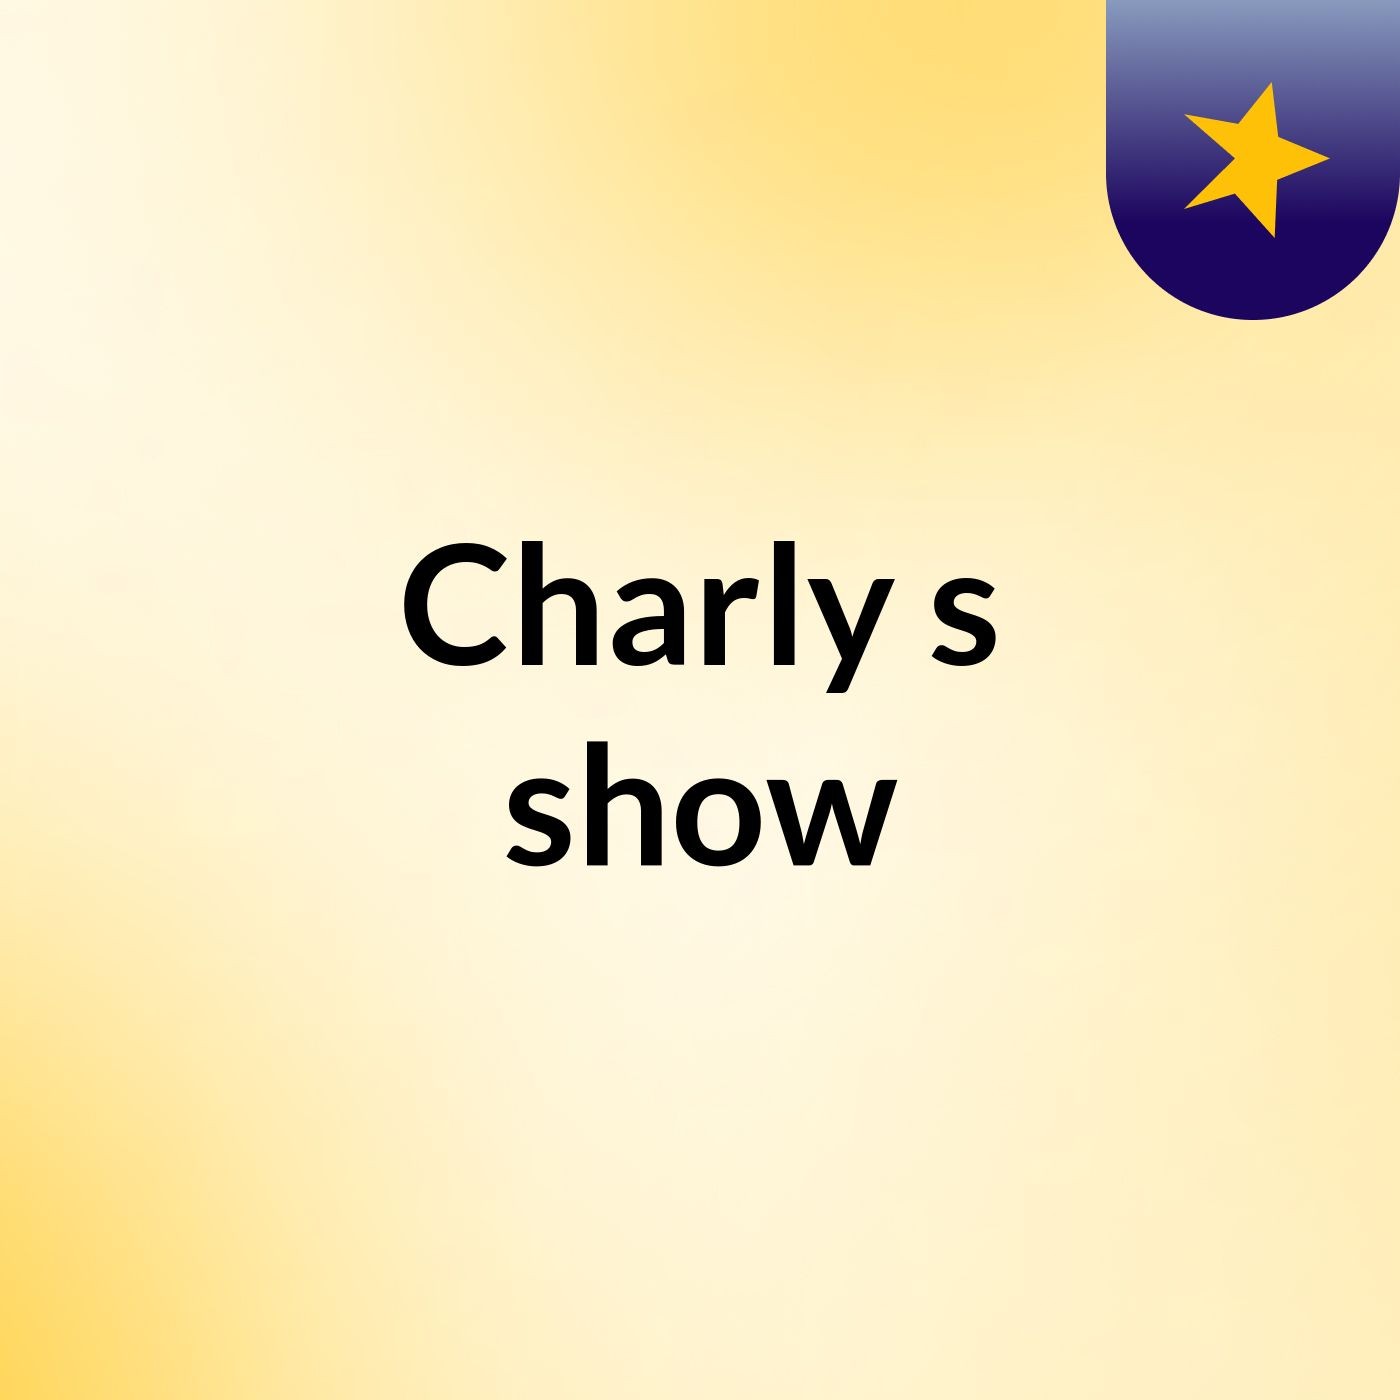 Charly's show